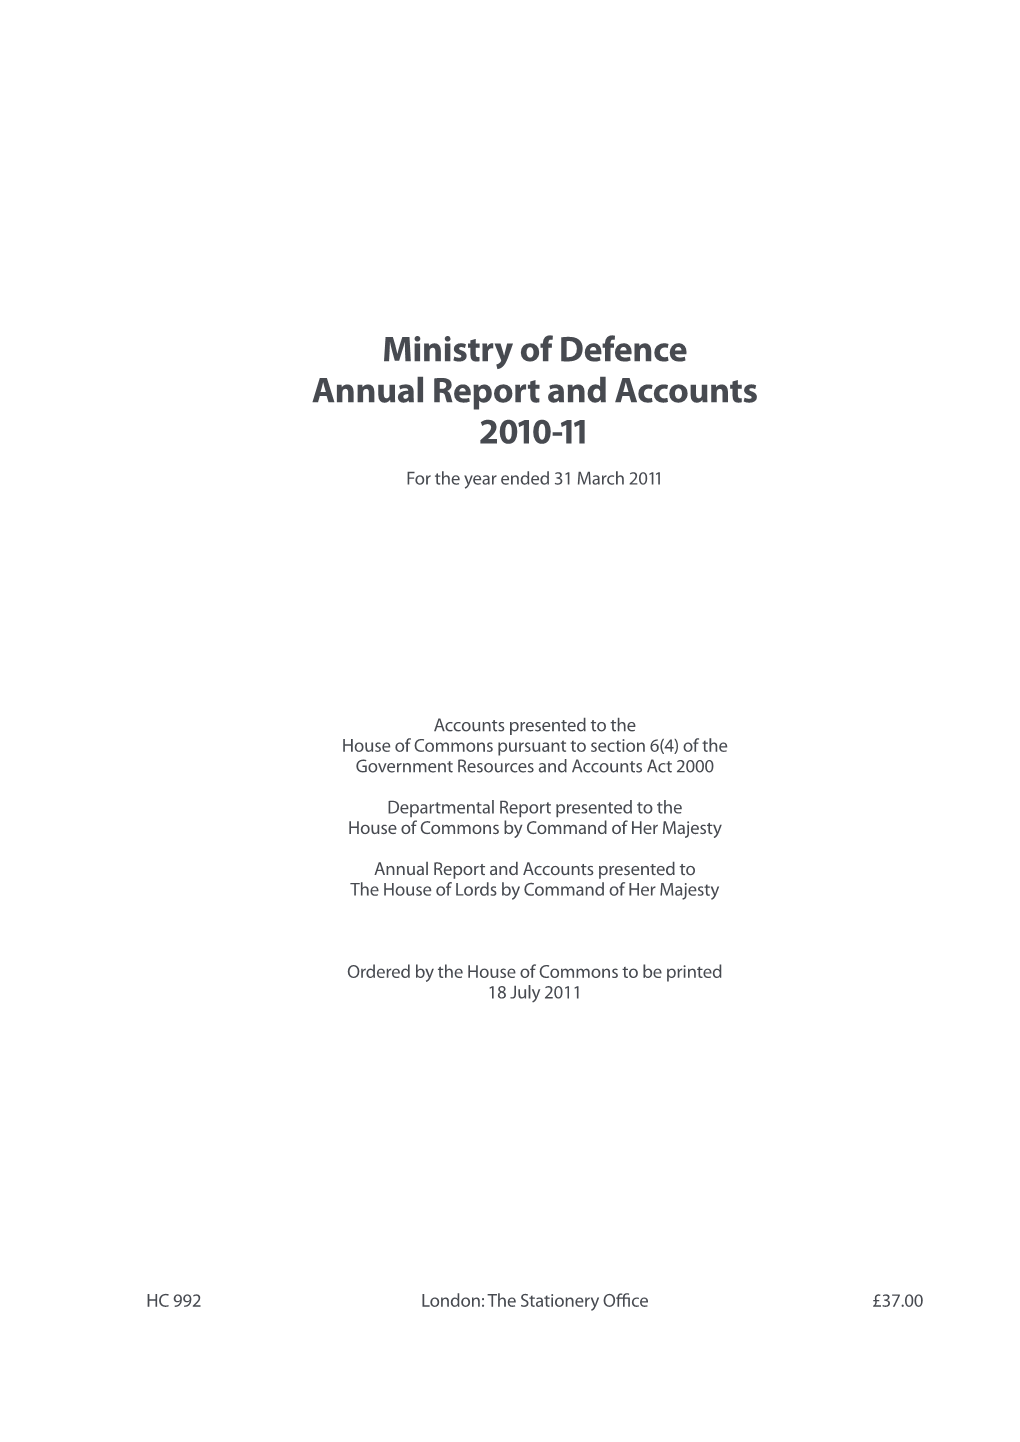 Ministry of Defence Annual Report and Accounts 2010-11 for the Year Ended 31 March 2011